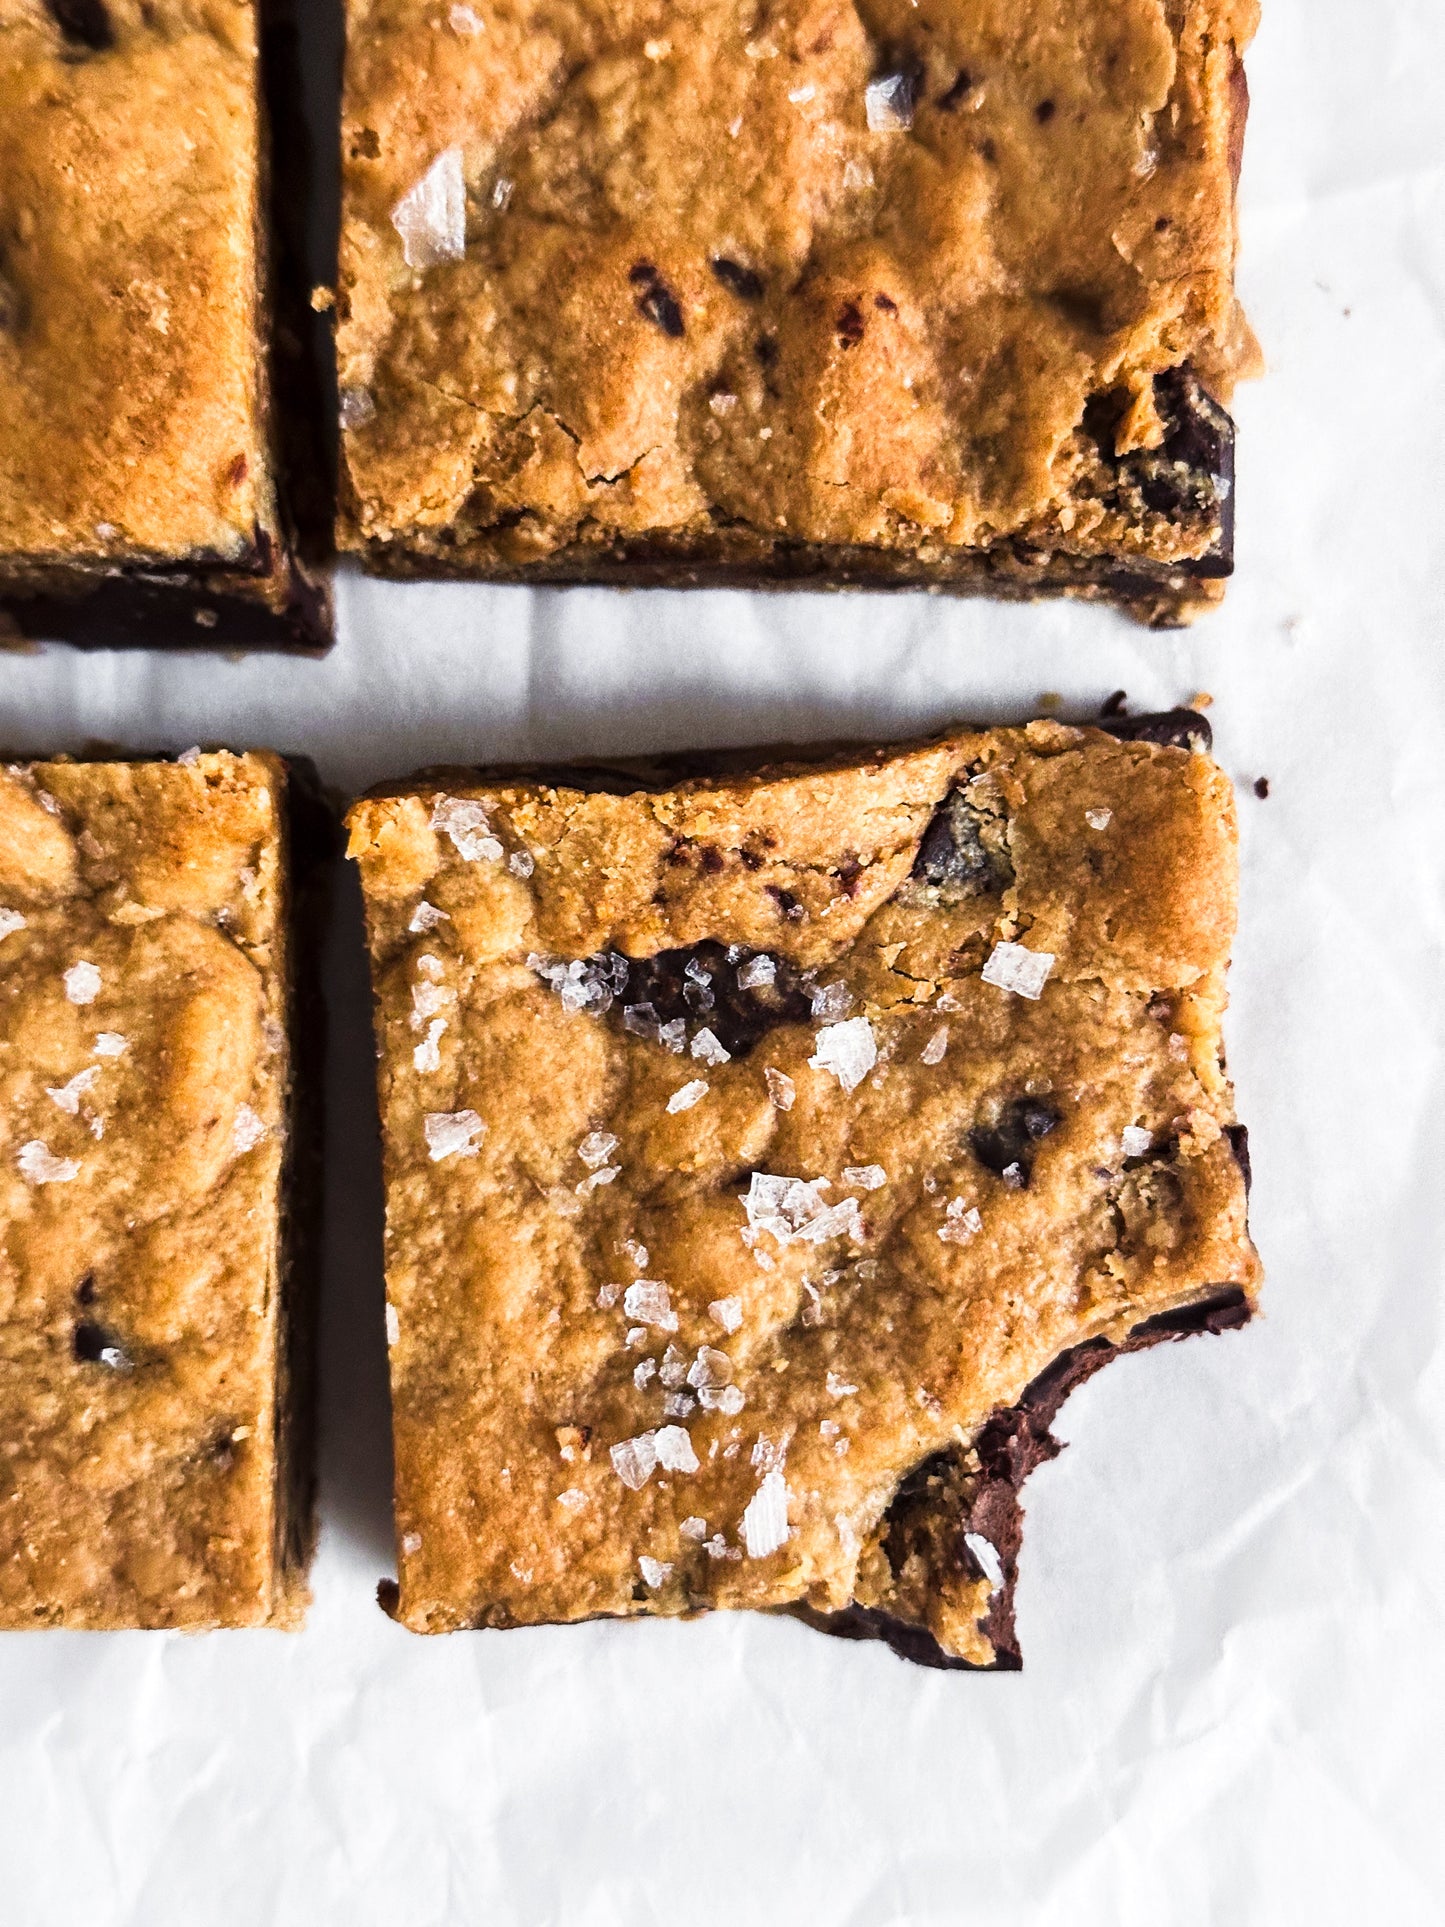 Limited Edition: Chocolate Chunk Cookie Bar